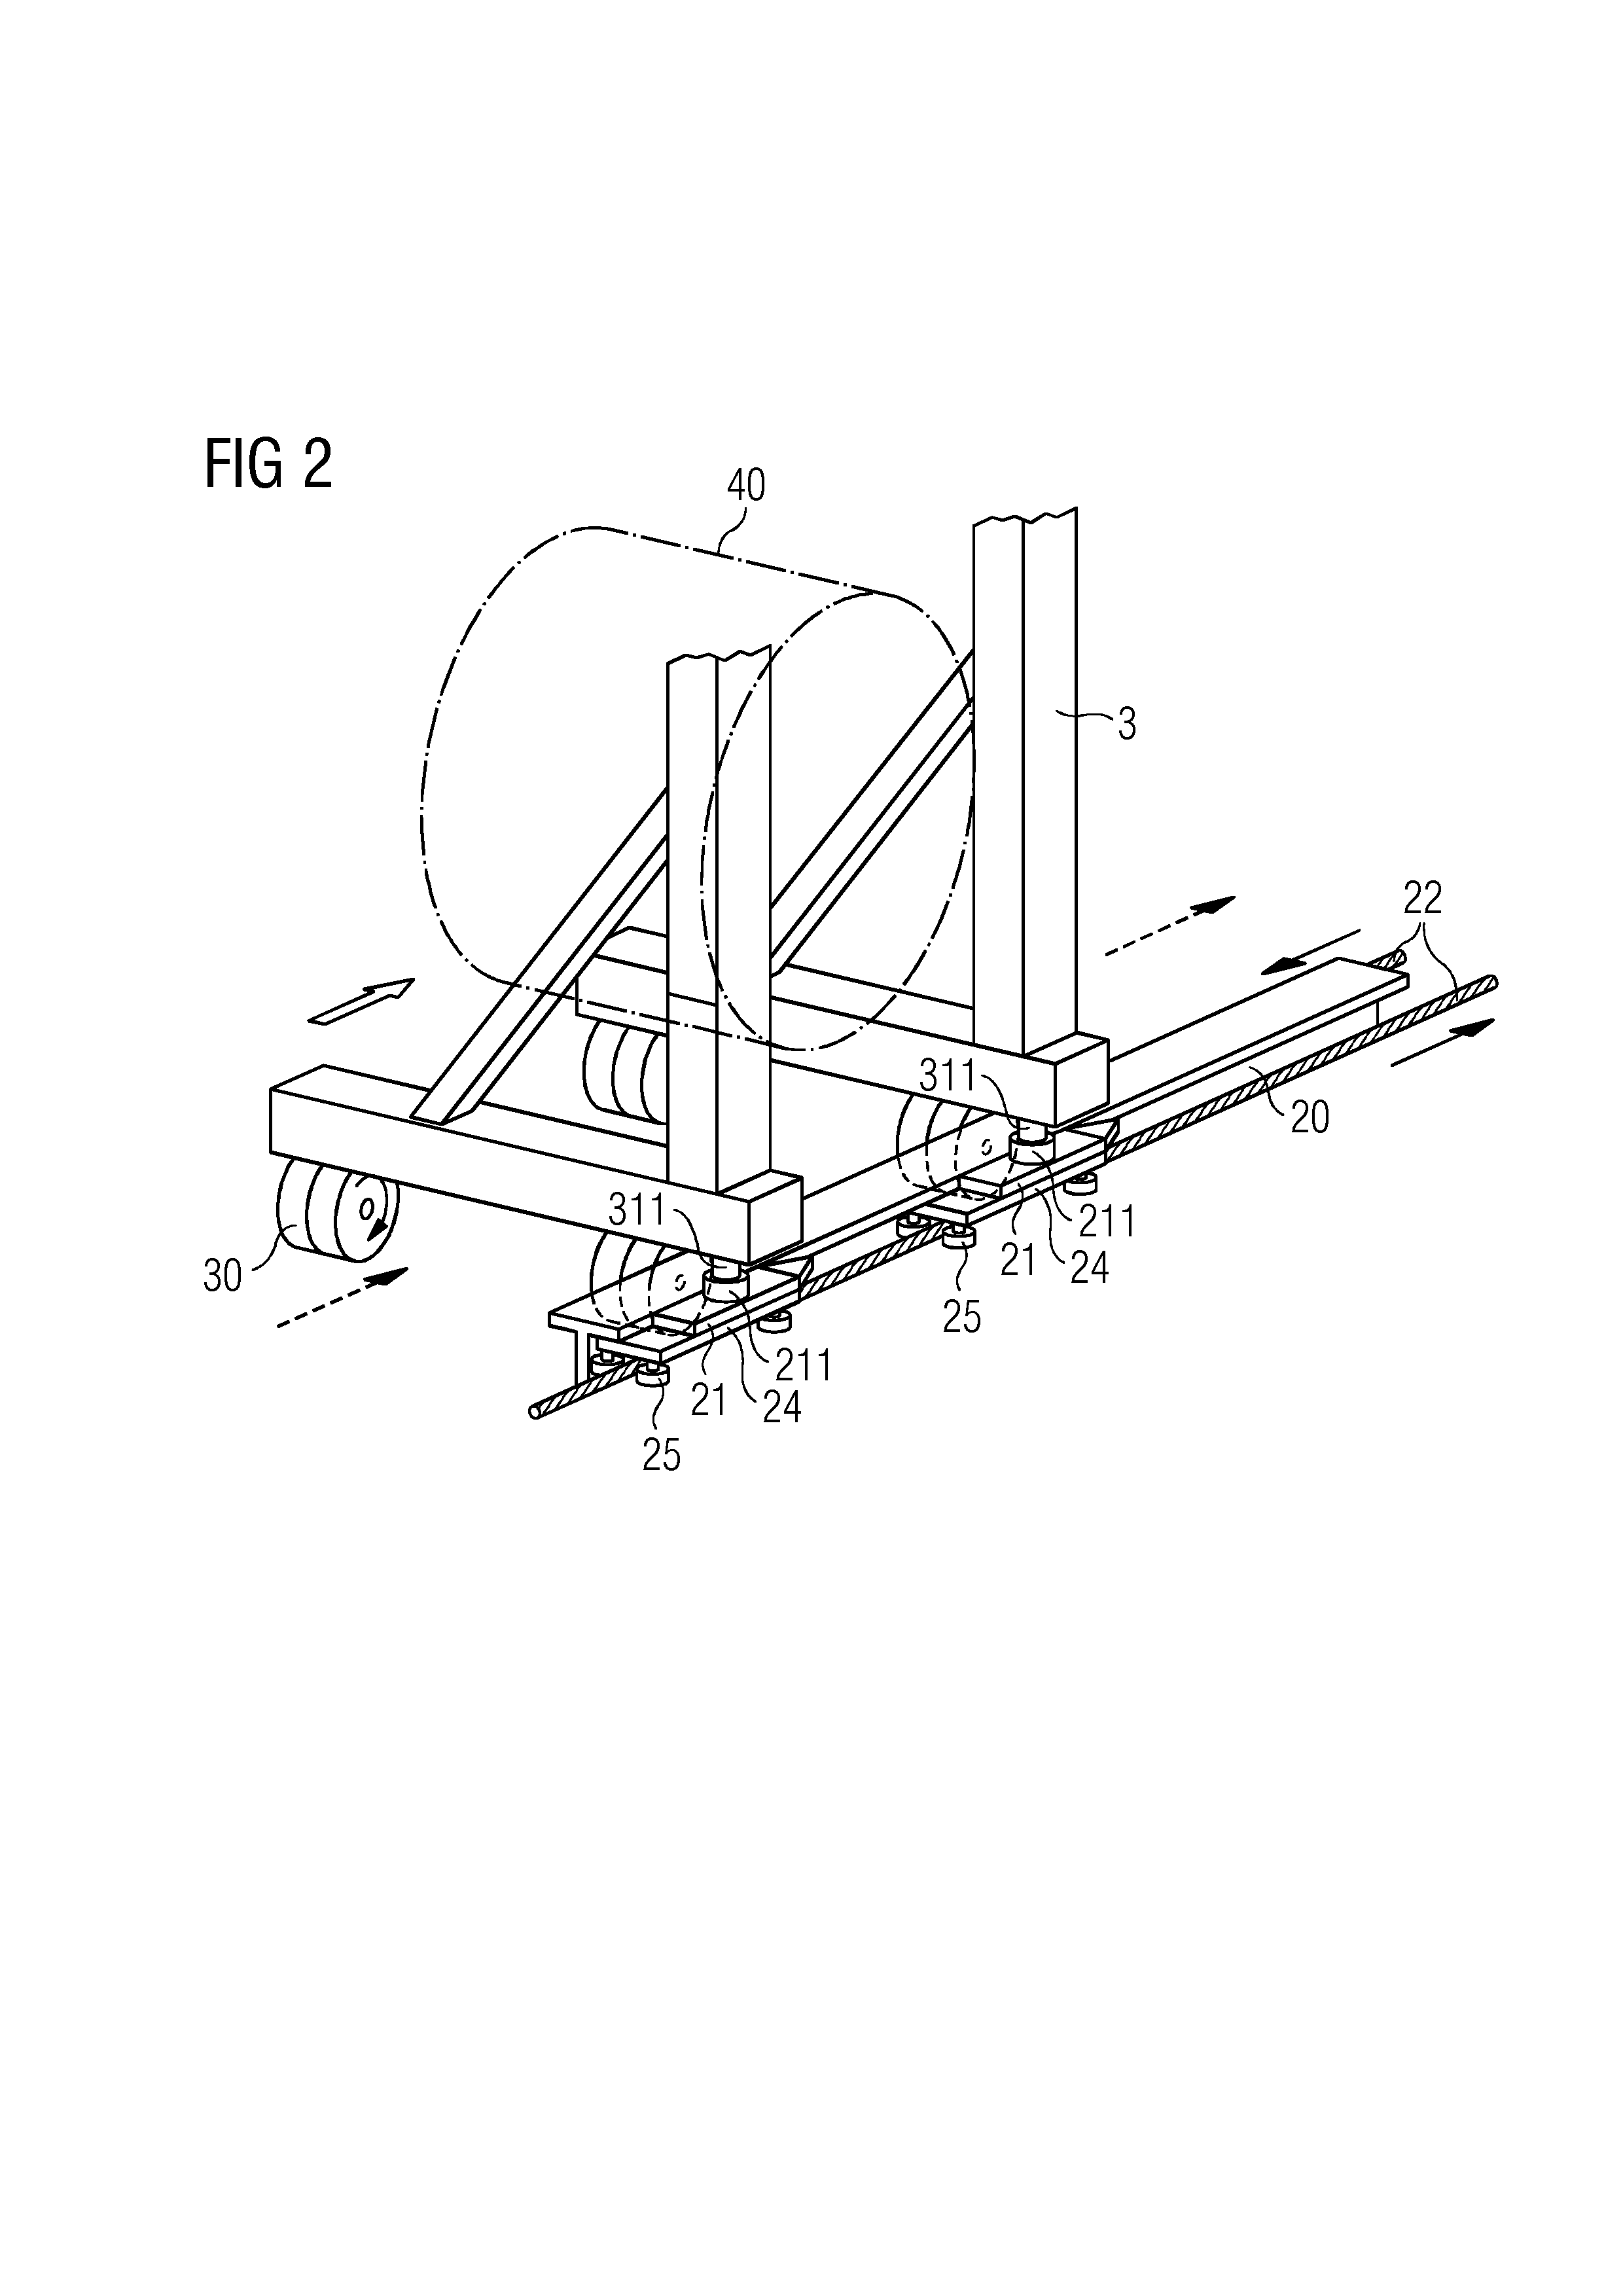 Conveyor apparatus for an assembly line